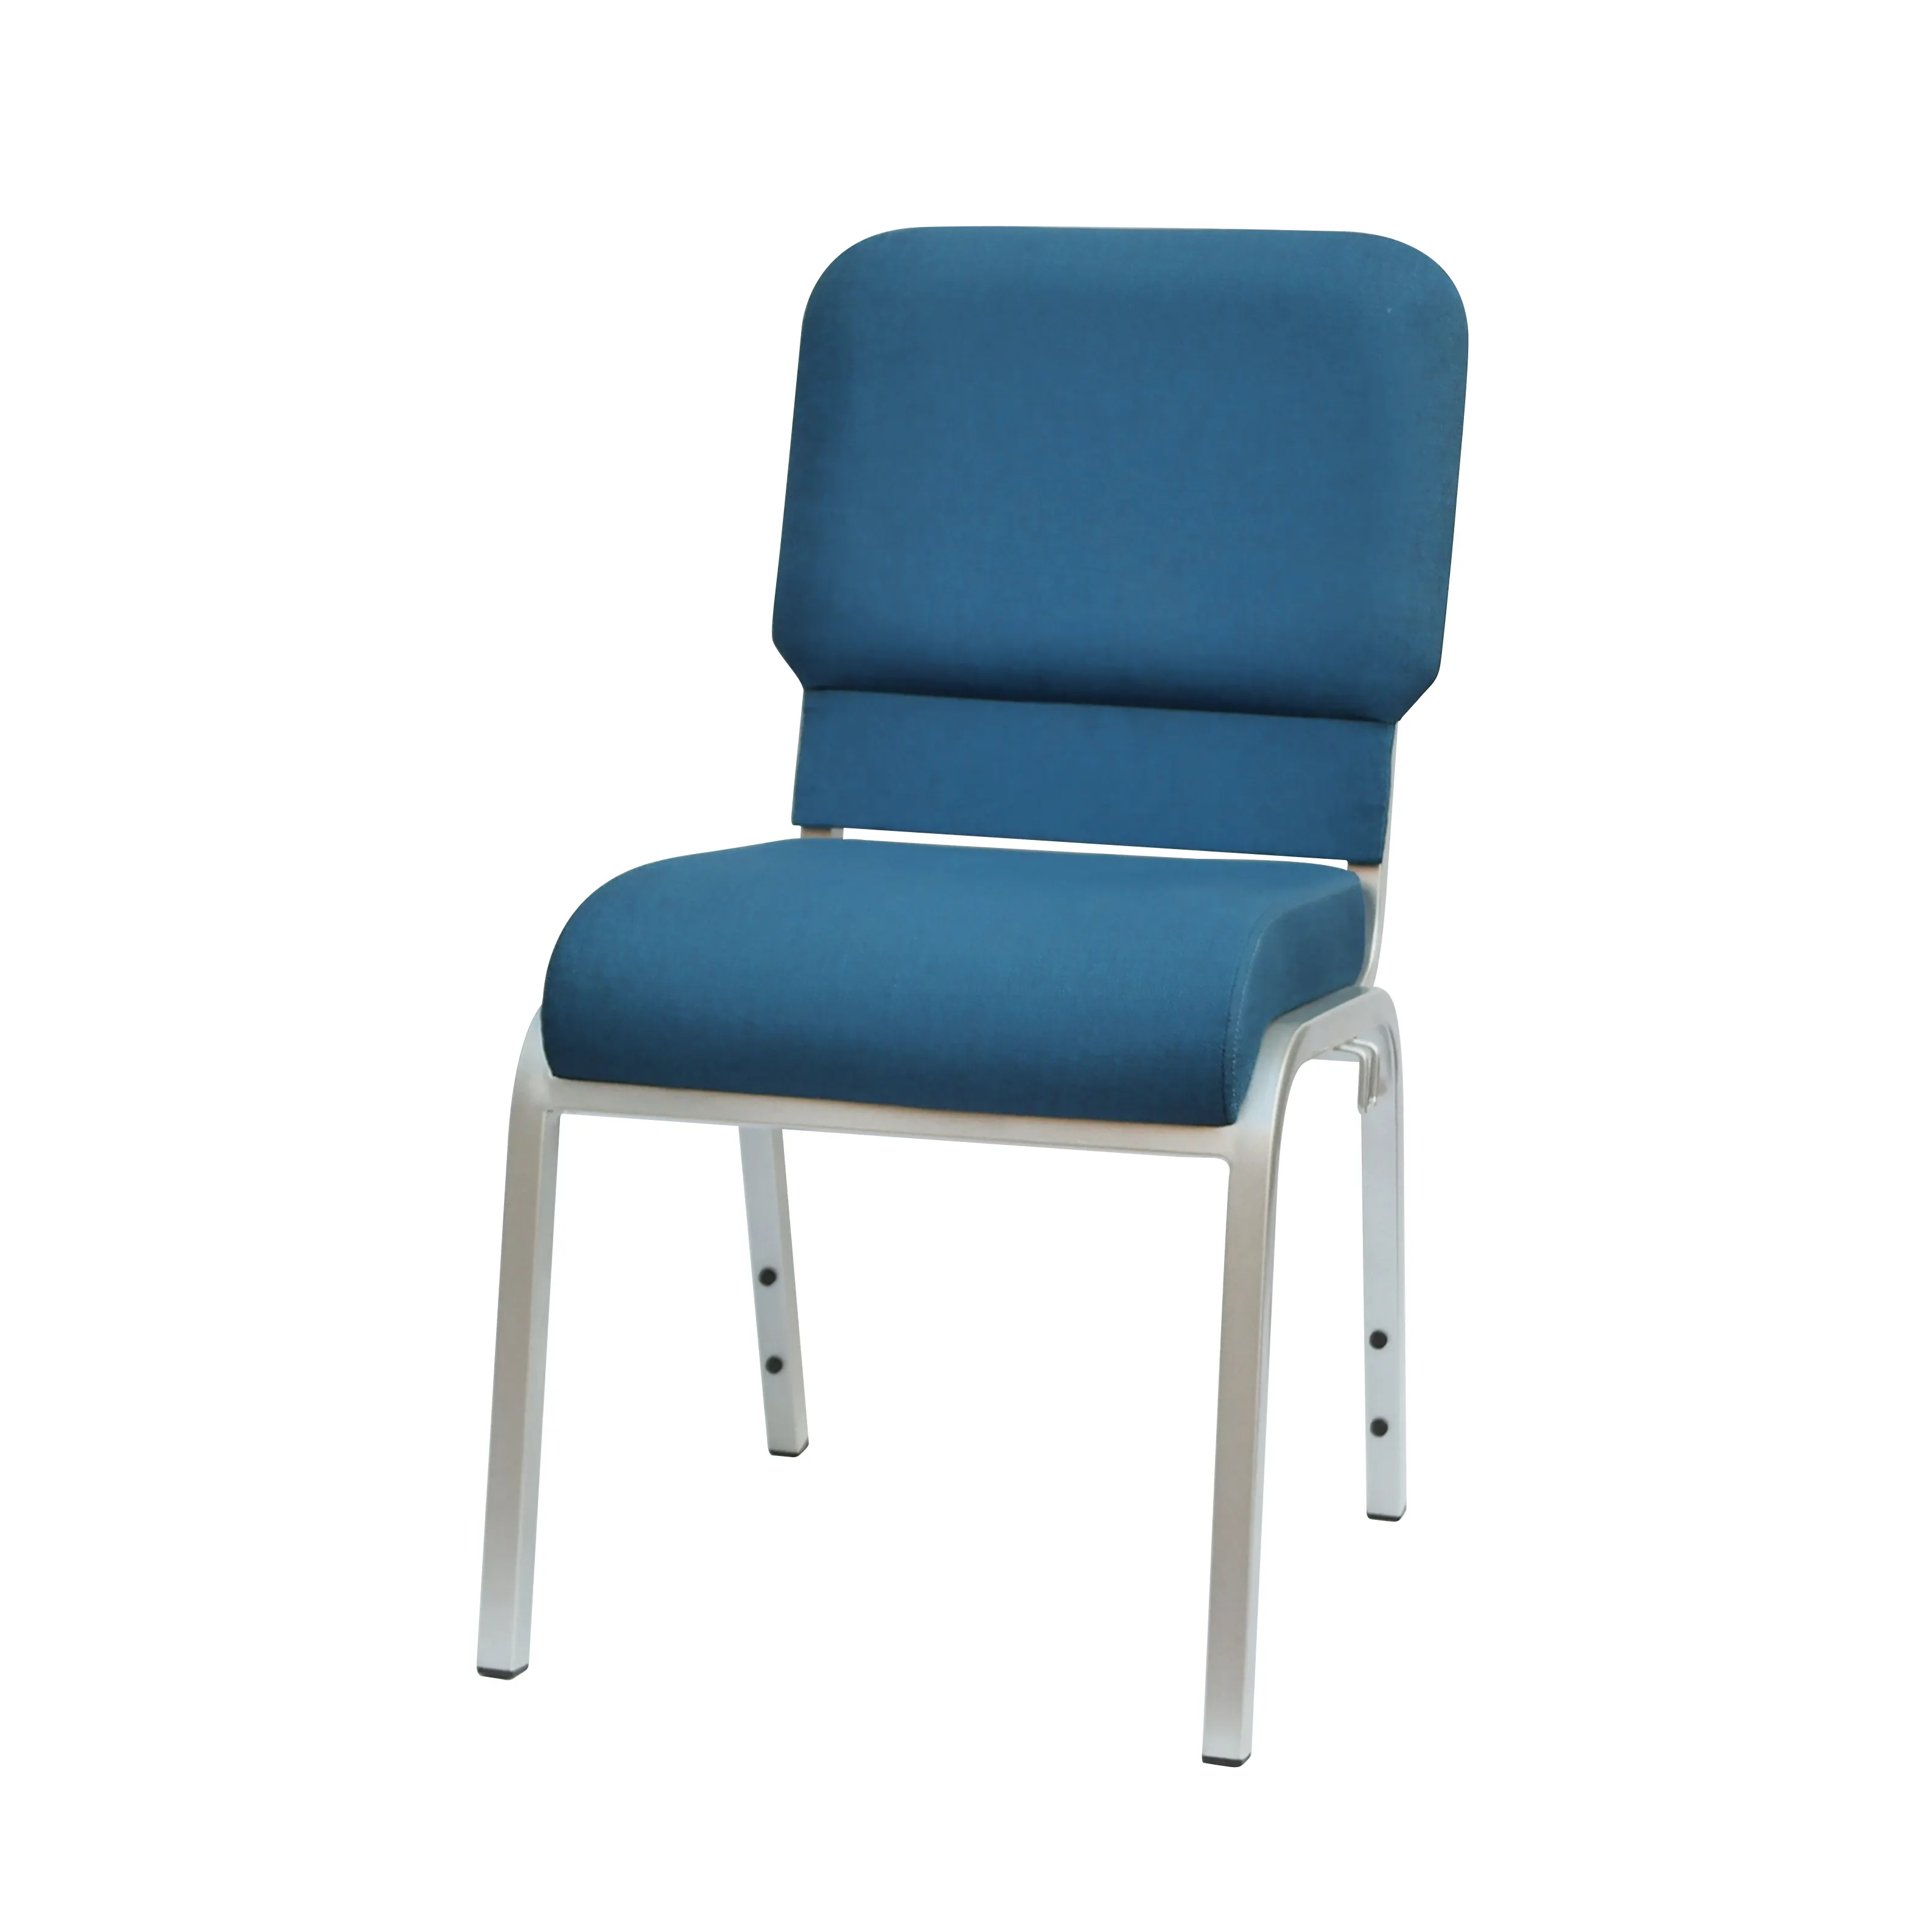 Interlocking Wholesale Blue Theater Lounge Seating Church Chairs for Sale